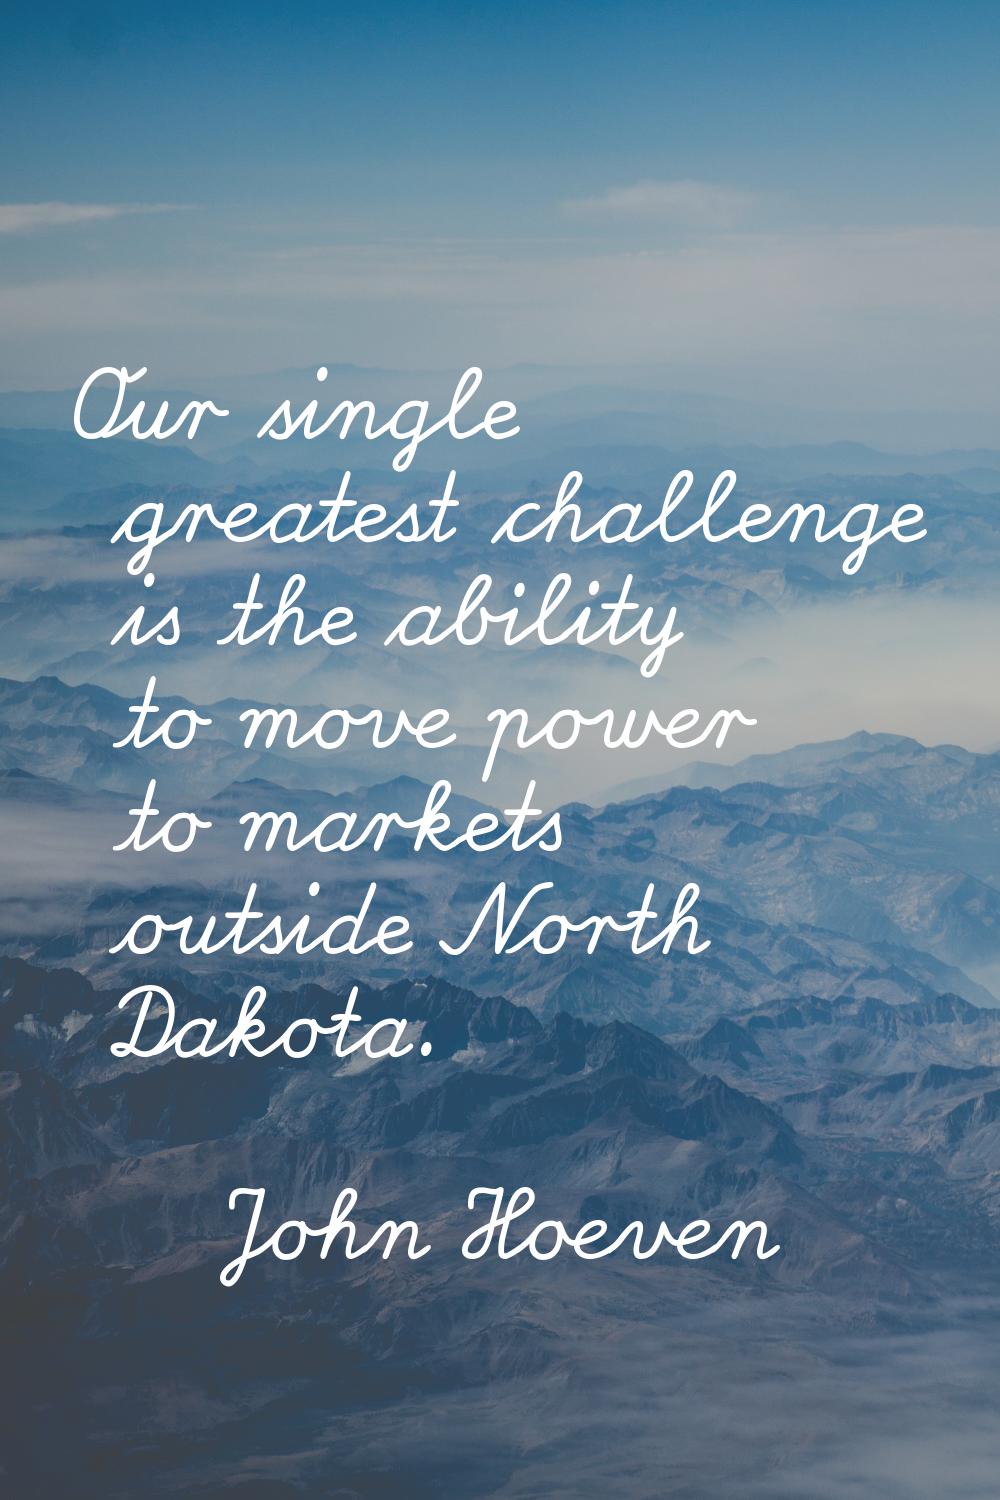 Our single greatest challenge is the ability to move power to markets outside North Dakota.